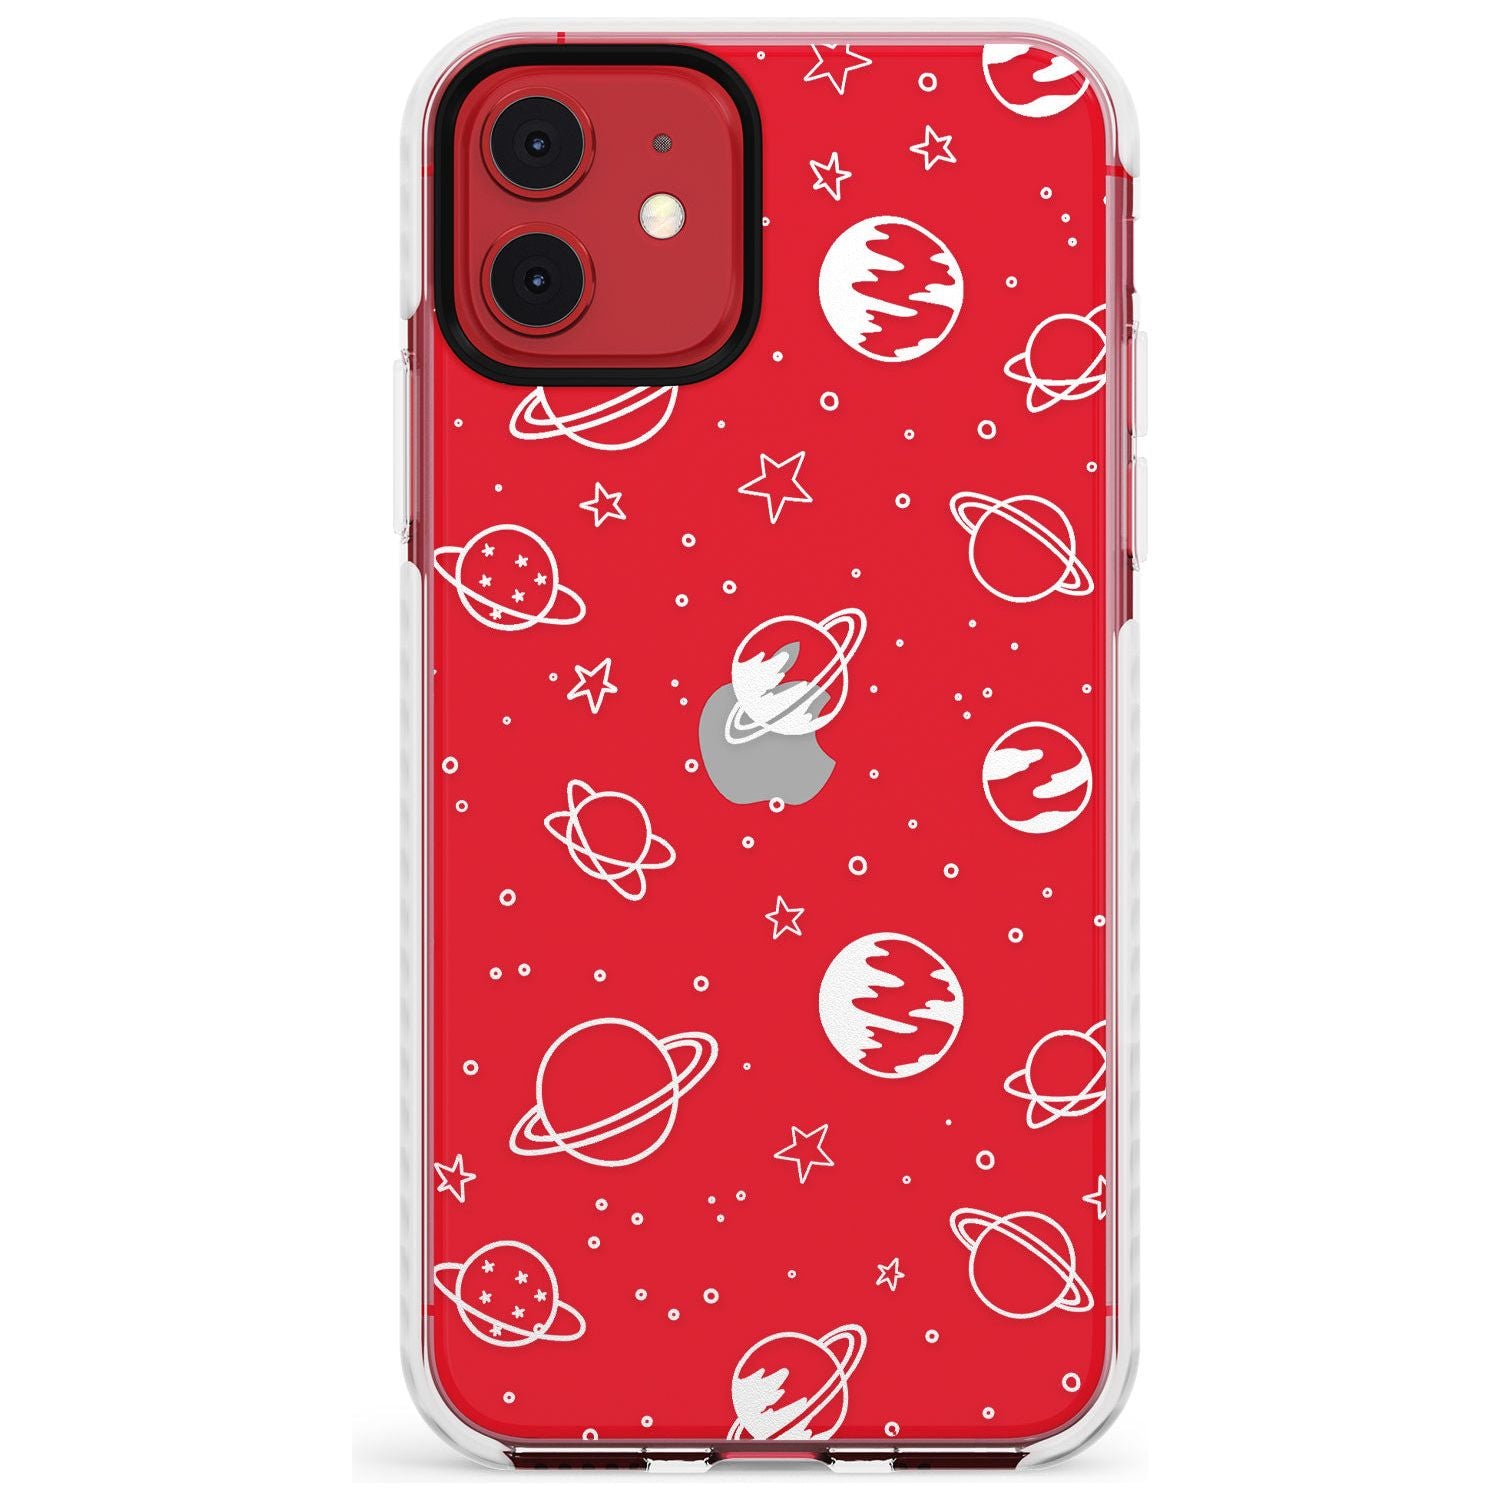 Outer Space Outlines: White on Clear Slim TPU Phone Case for iPhone 11